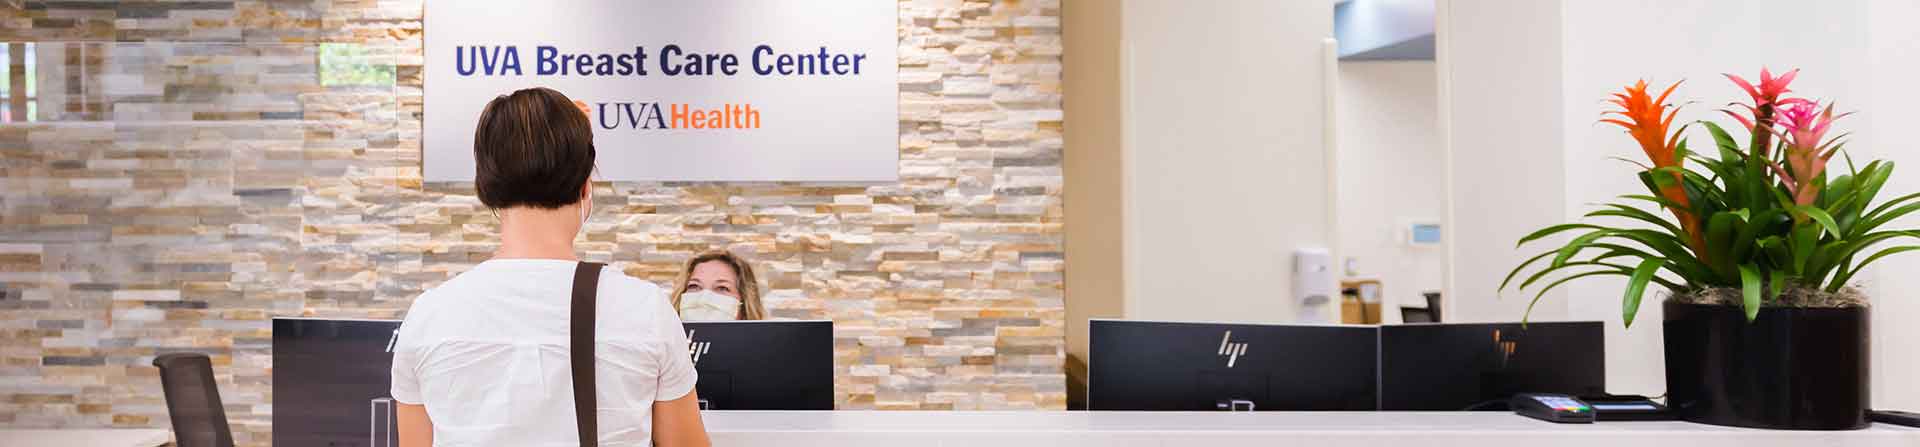 Patient at breast care center desk